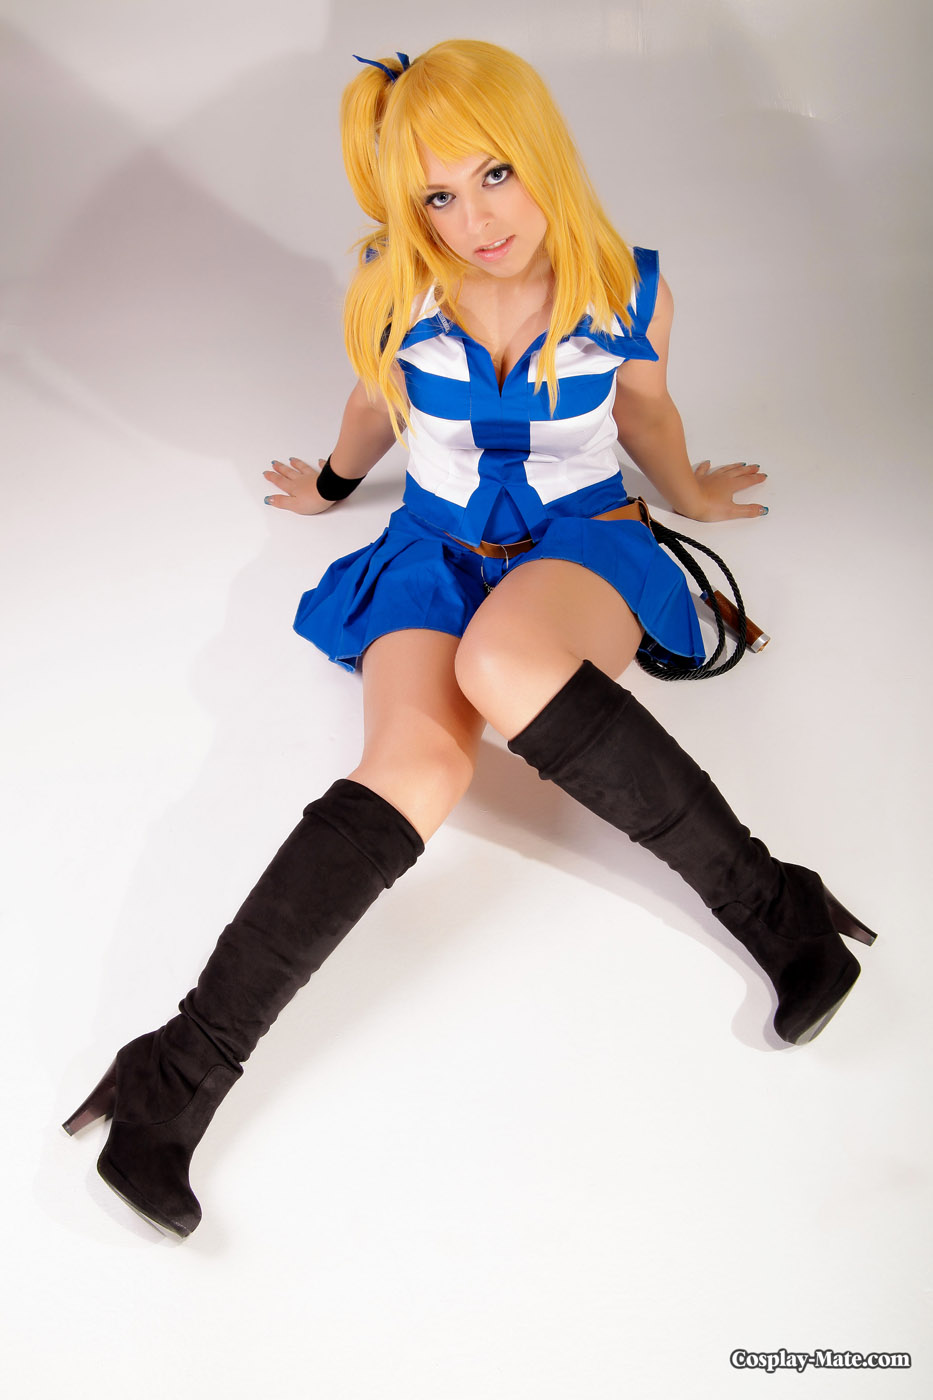 lucy heartfilia fairy tail for cosplay mate cherry nudes 2